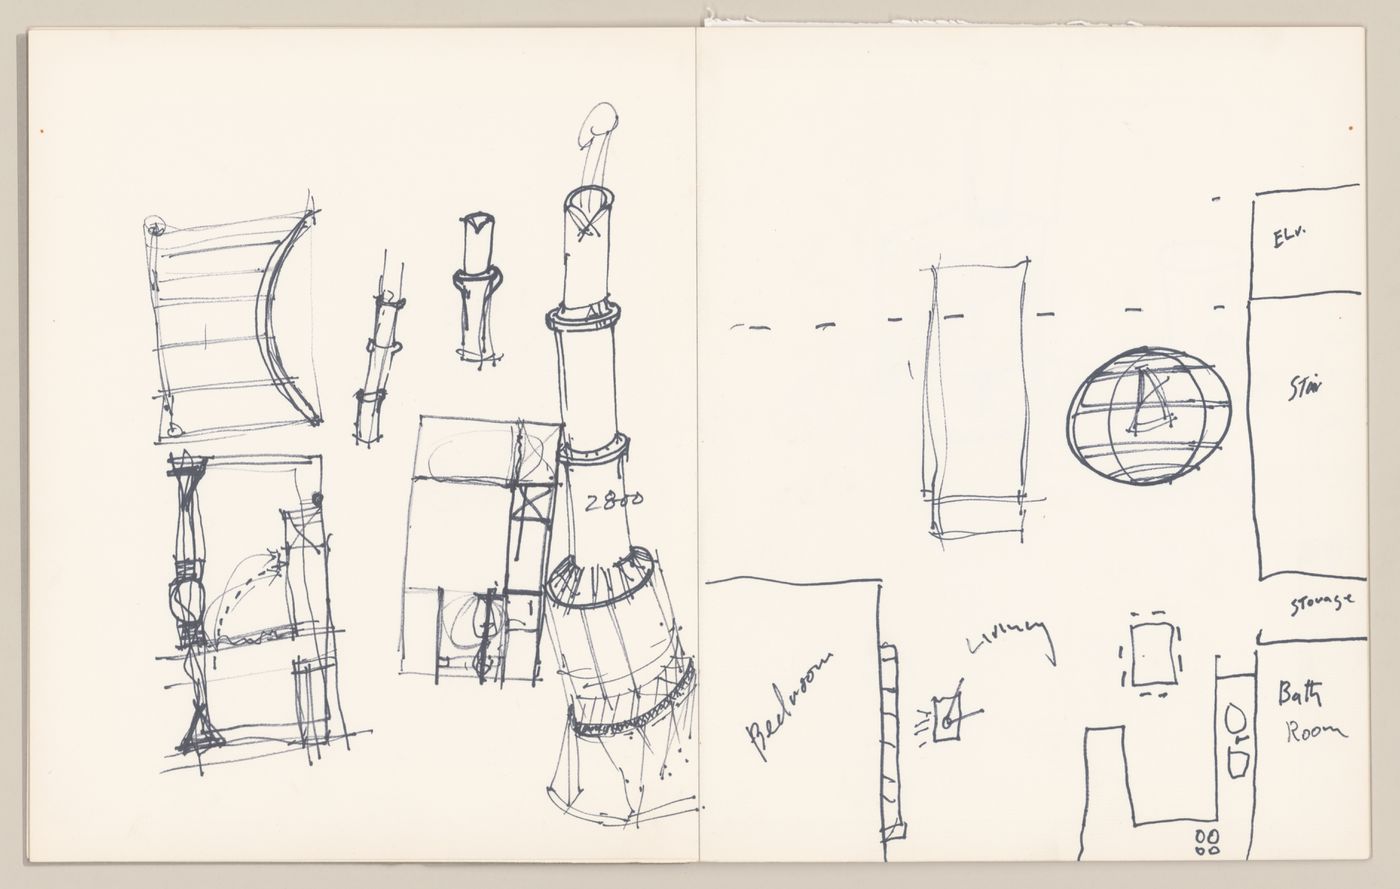 Sketchpad with drawings for a loft and the design of a wood stove